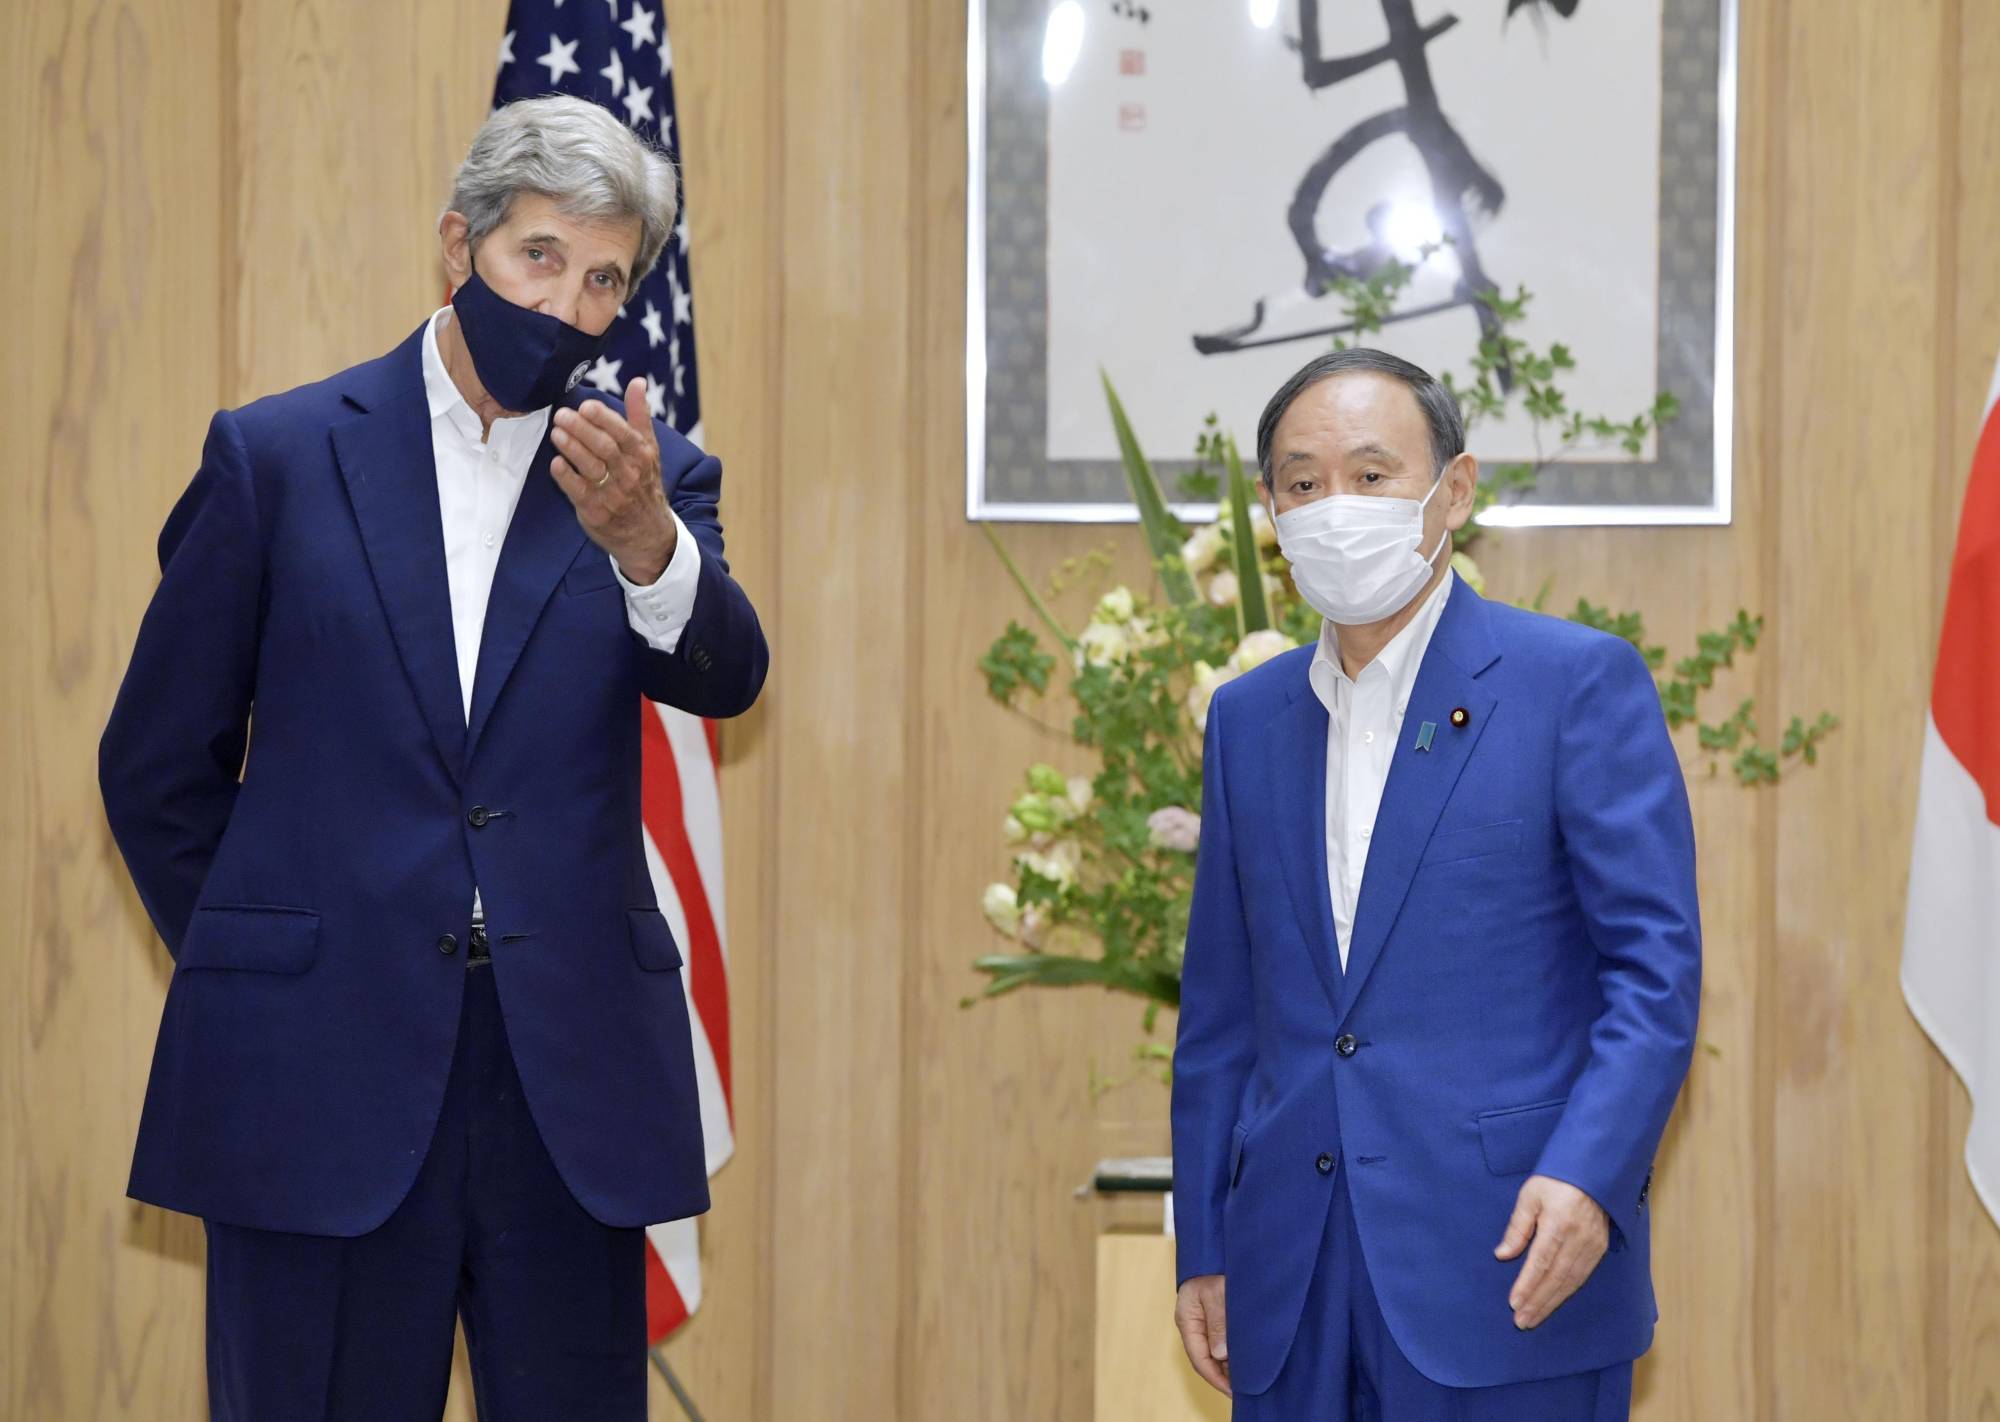 U.S. climate envoy John Kerry (left) meets with then-Prime Minister Yoshihide Suga at the premier's office on Aug. 31. | KYODO